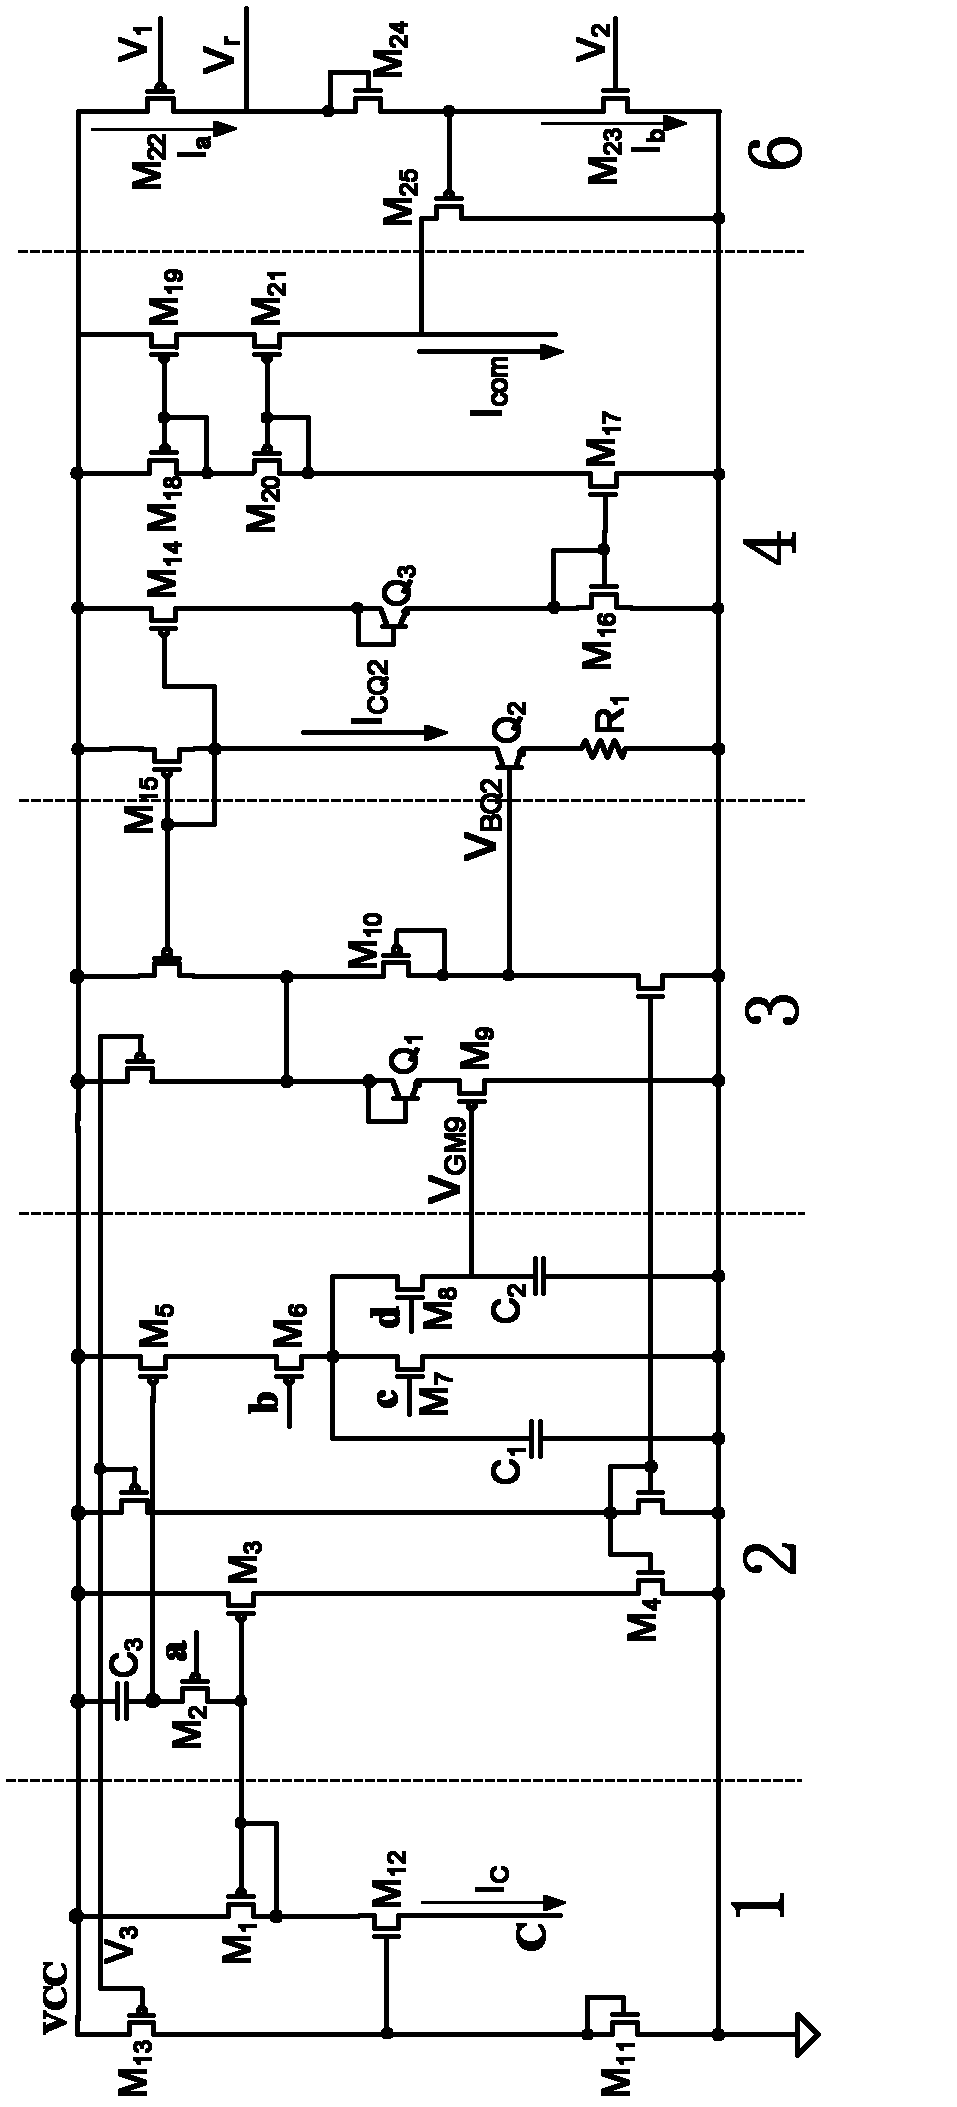 Primary inductance correction circuit applied to flyback switching power supply